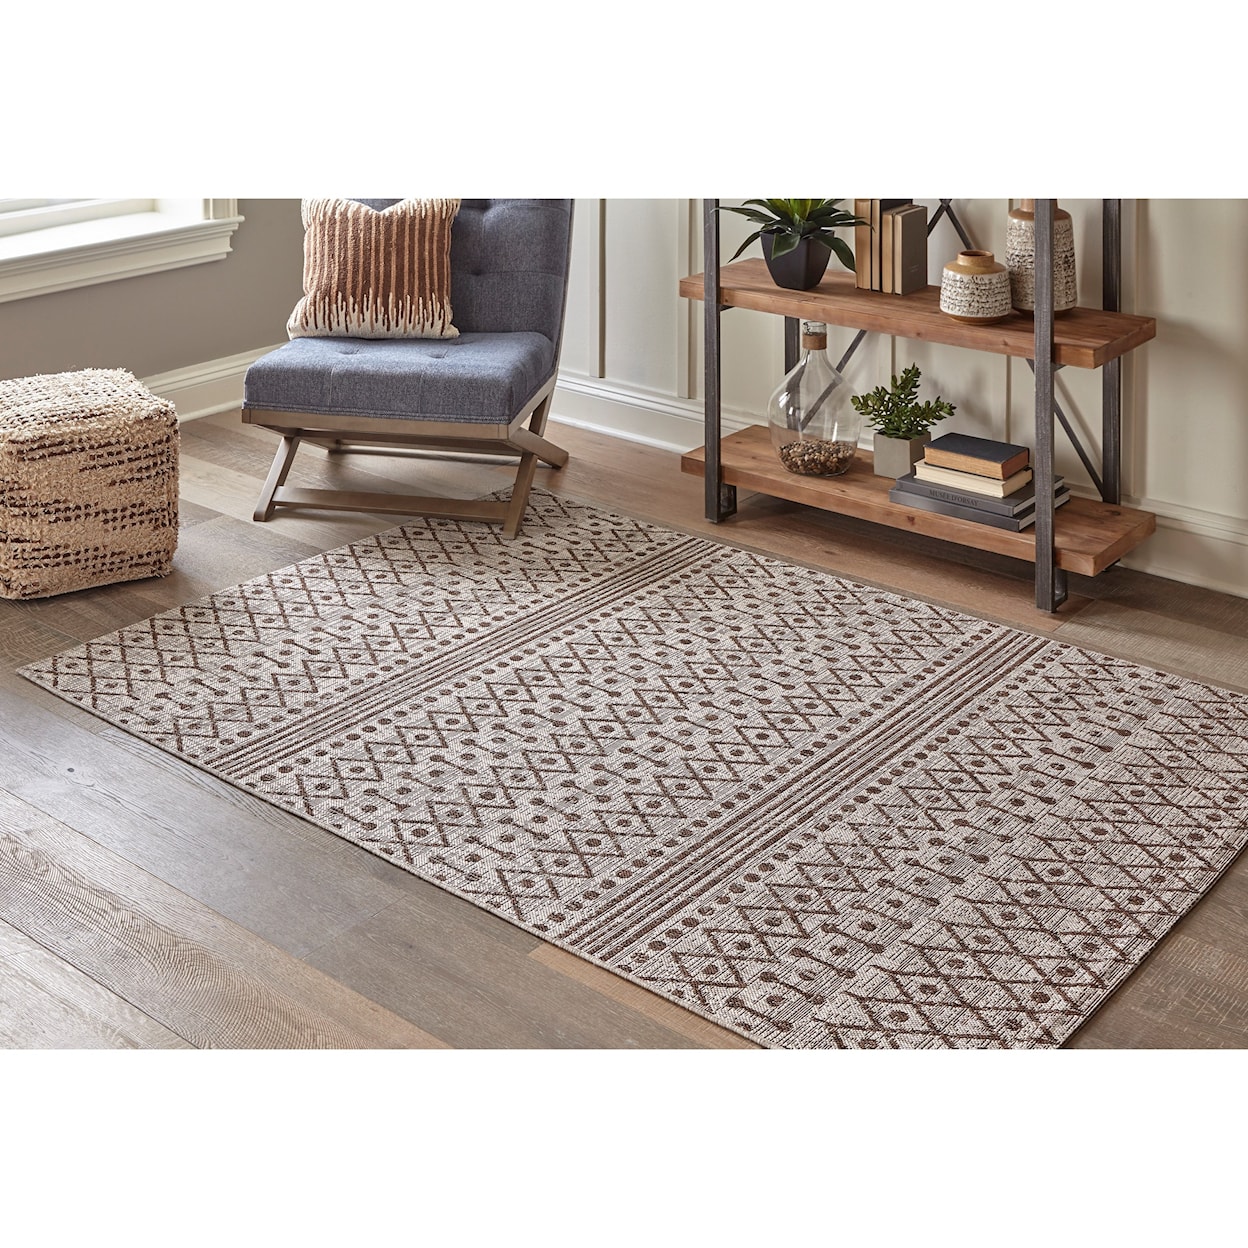 Signature Design by Ashley Casual Area Rugs Dubot Tan/Brown Indoor/Outdoor Medium Rug